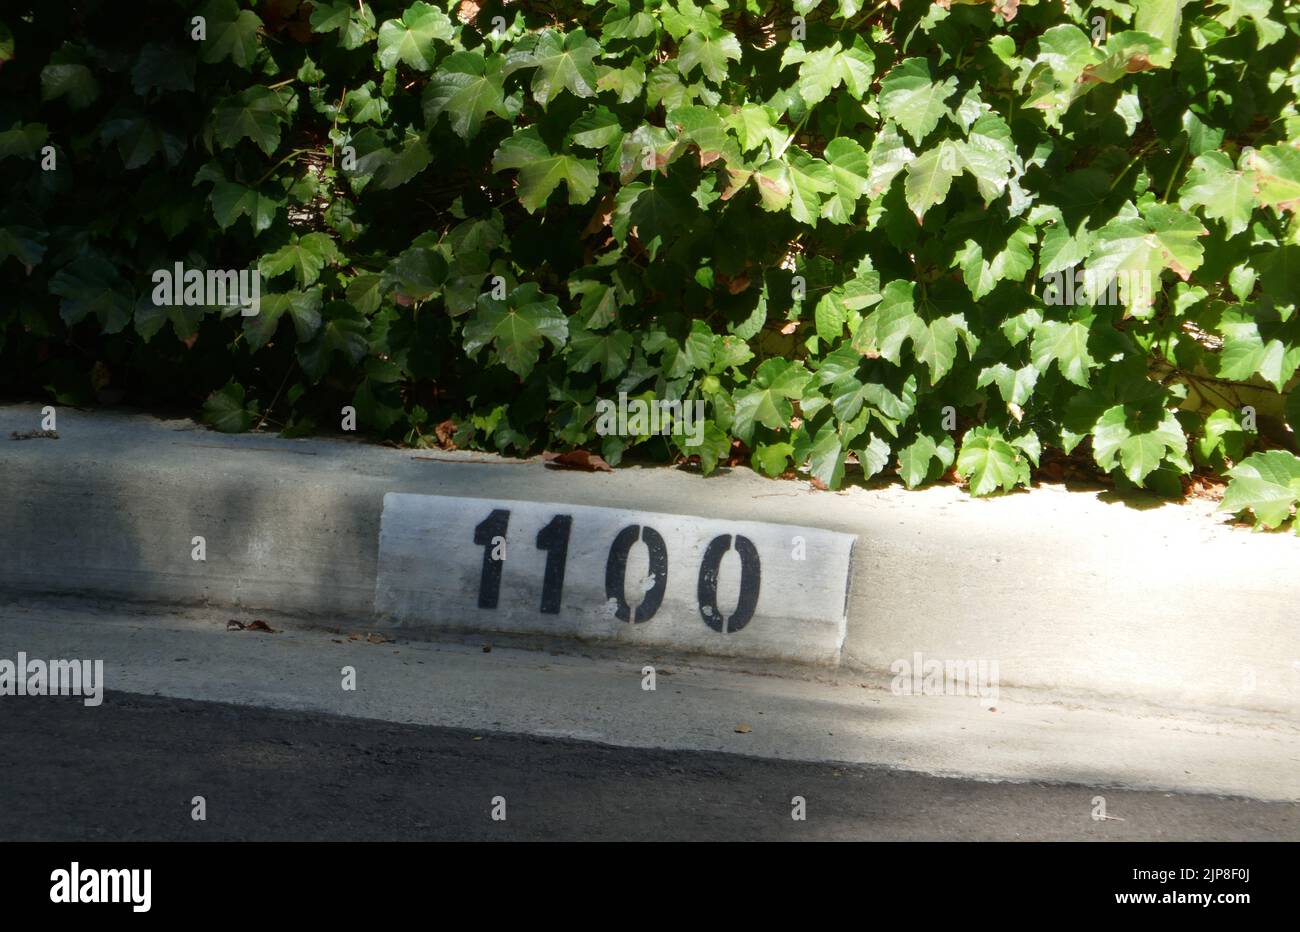 Beverly Hills, California, USA 15th August 2022 Actor Glenn Ford's Former Home/house at 1100 Summit Drive on August 15, 2022 in Beverly Hills, California, USA. Photo by Barry King/Alamy Stock Photo Stock Photo